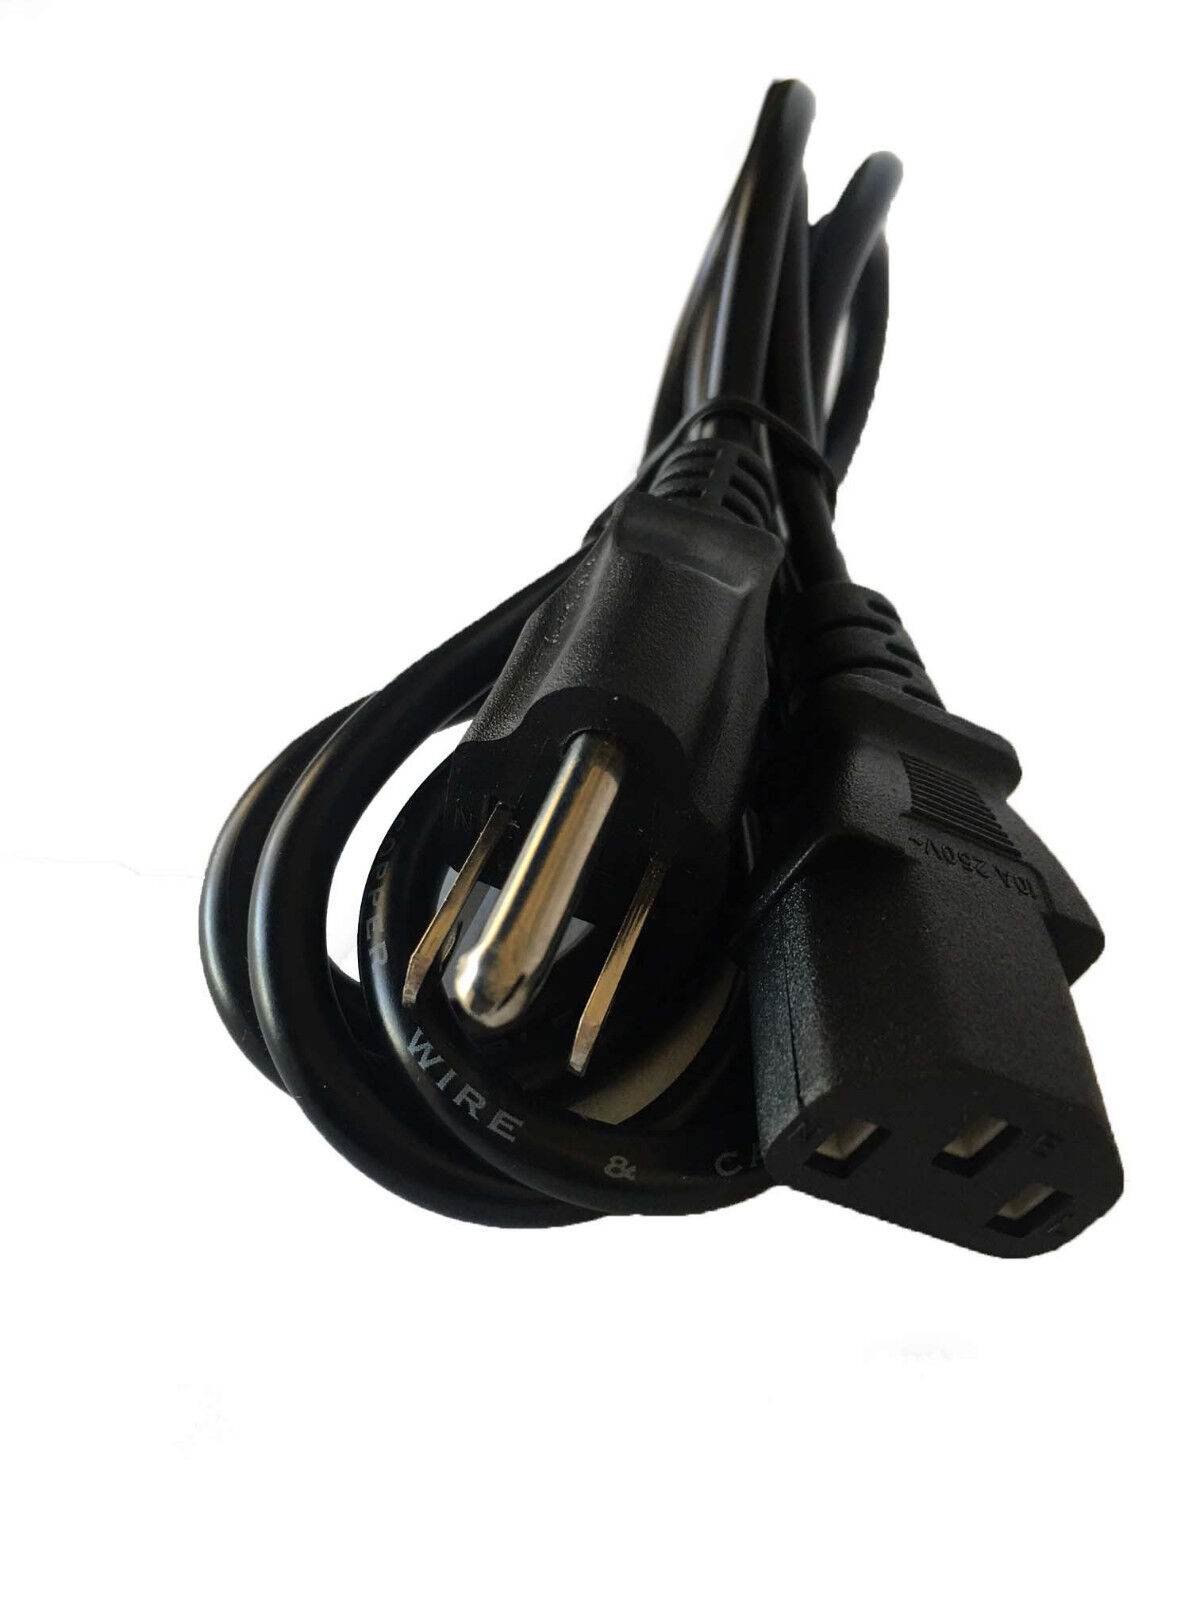 New US Standard 5ft AC Power Cord Cable for PC, Flat Panel LCD Computer Monitors